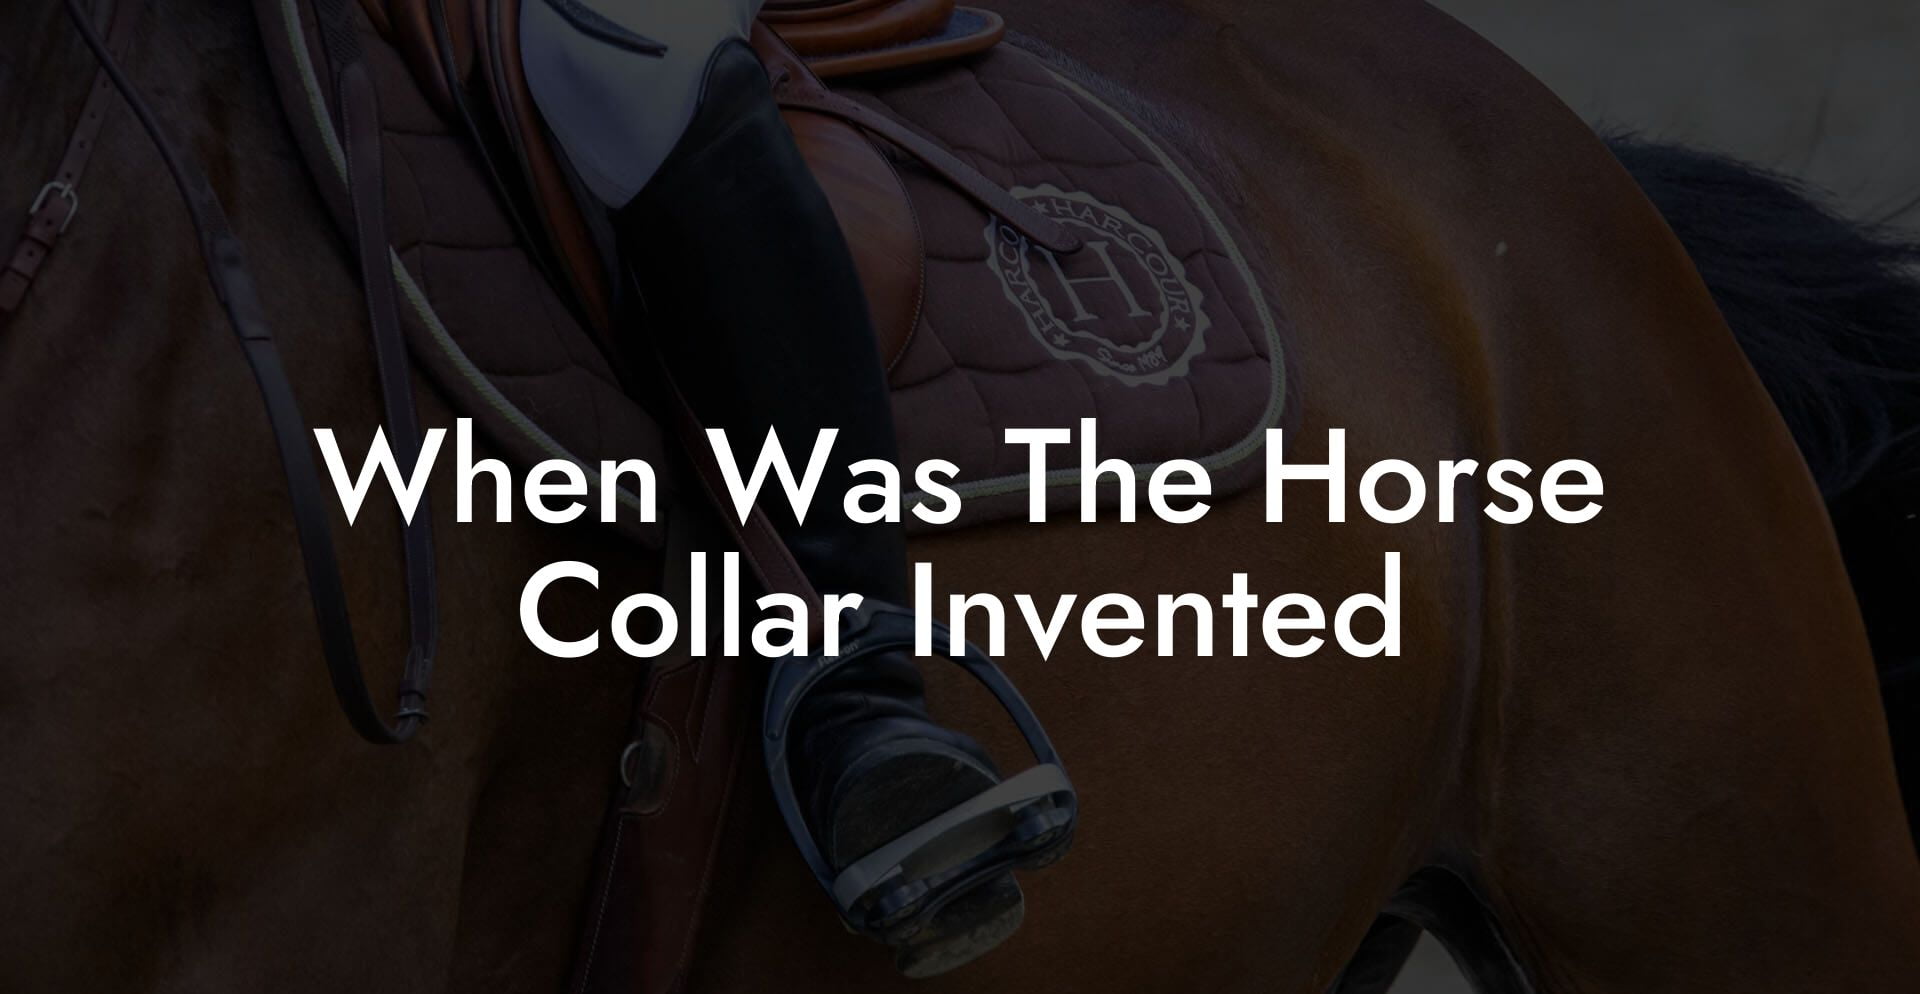 When Was The Horse Collar Invented